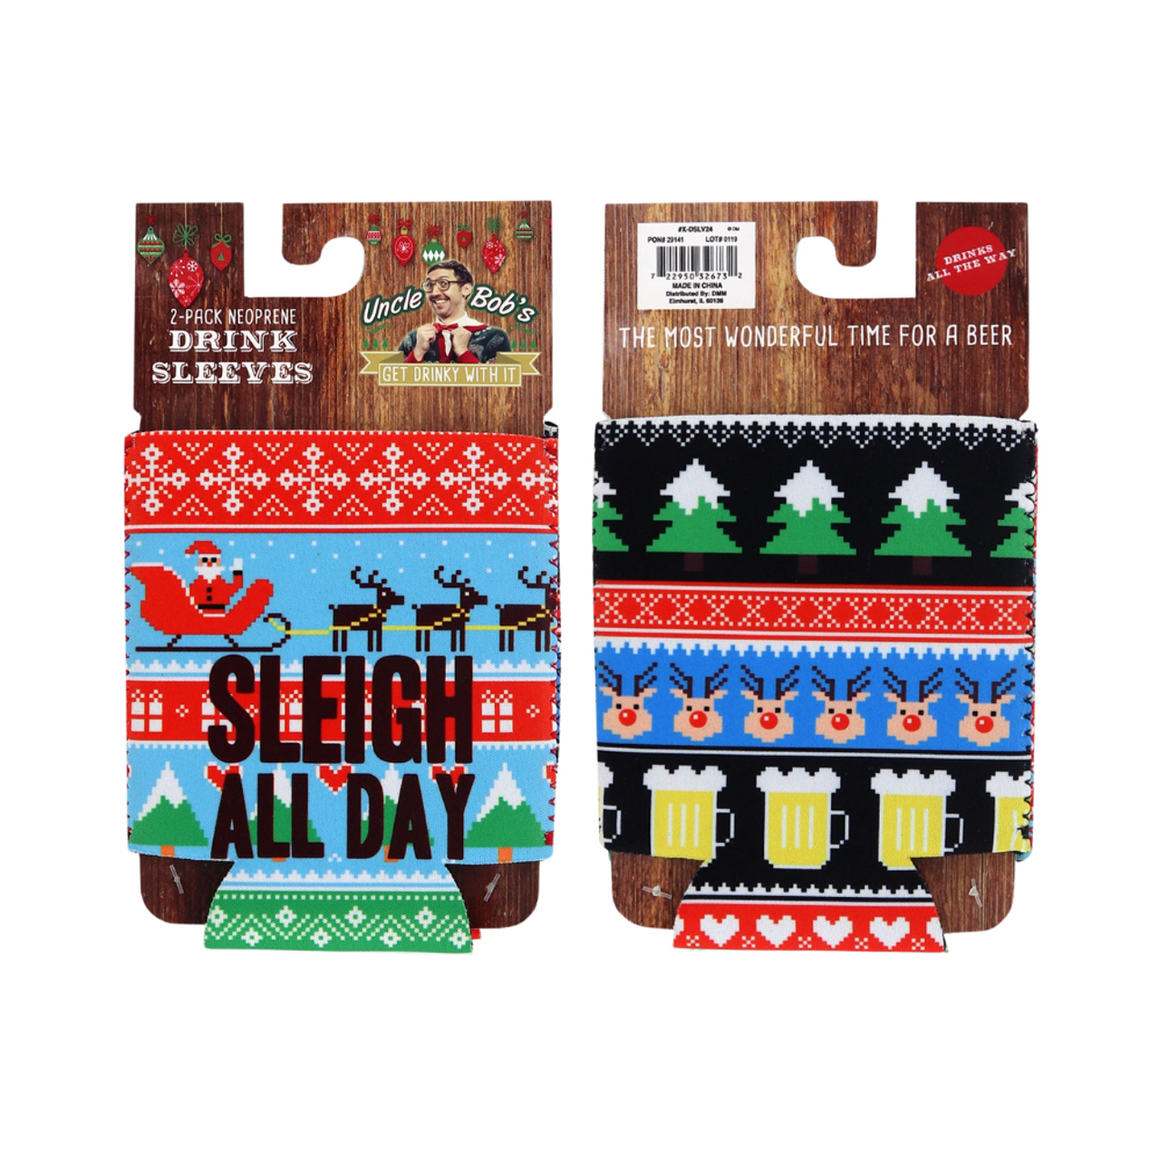 2-Pack Can Cooler | Sleigh All Day